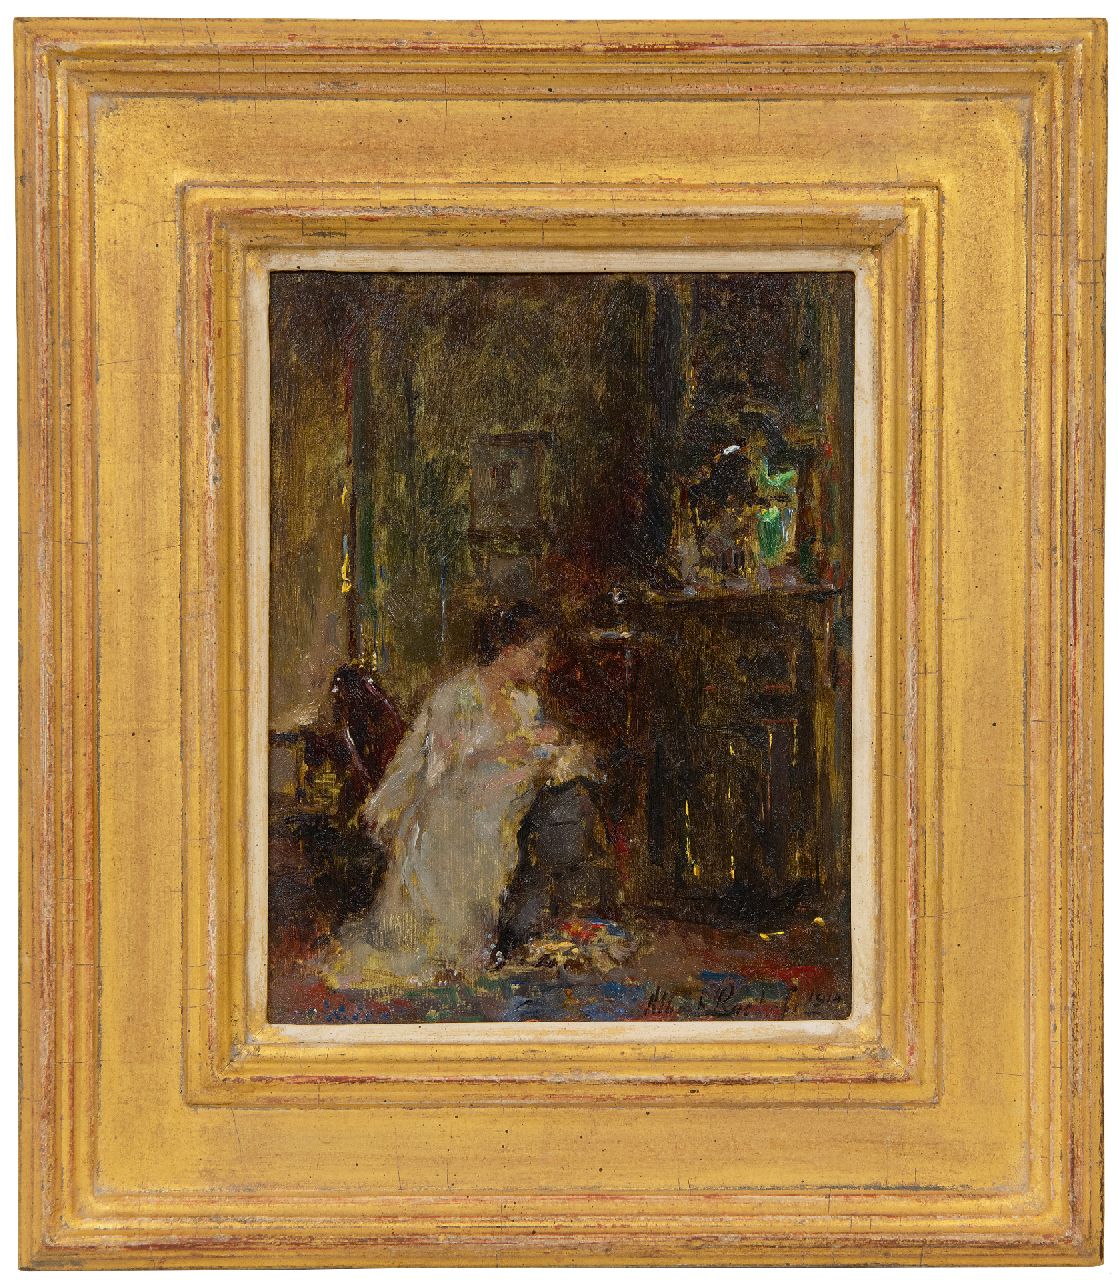 Roelofs O.W.A.  | Otto Willem Albertus 'Albert' Roelofs | Paintings offered for sale | Woman in an interior, oil on panel 17.8 x 13.8 cm, signed l.r. and dated 1914